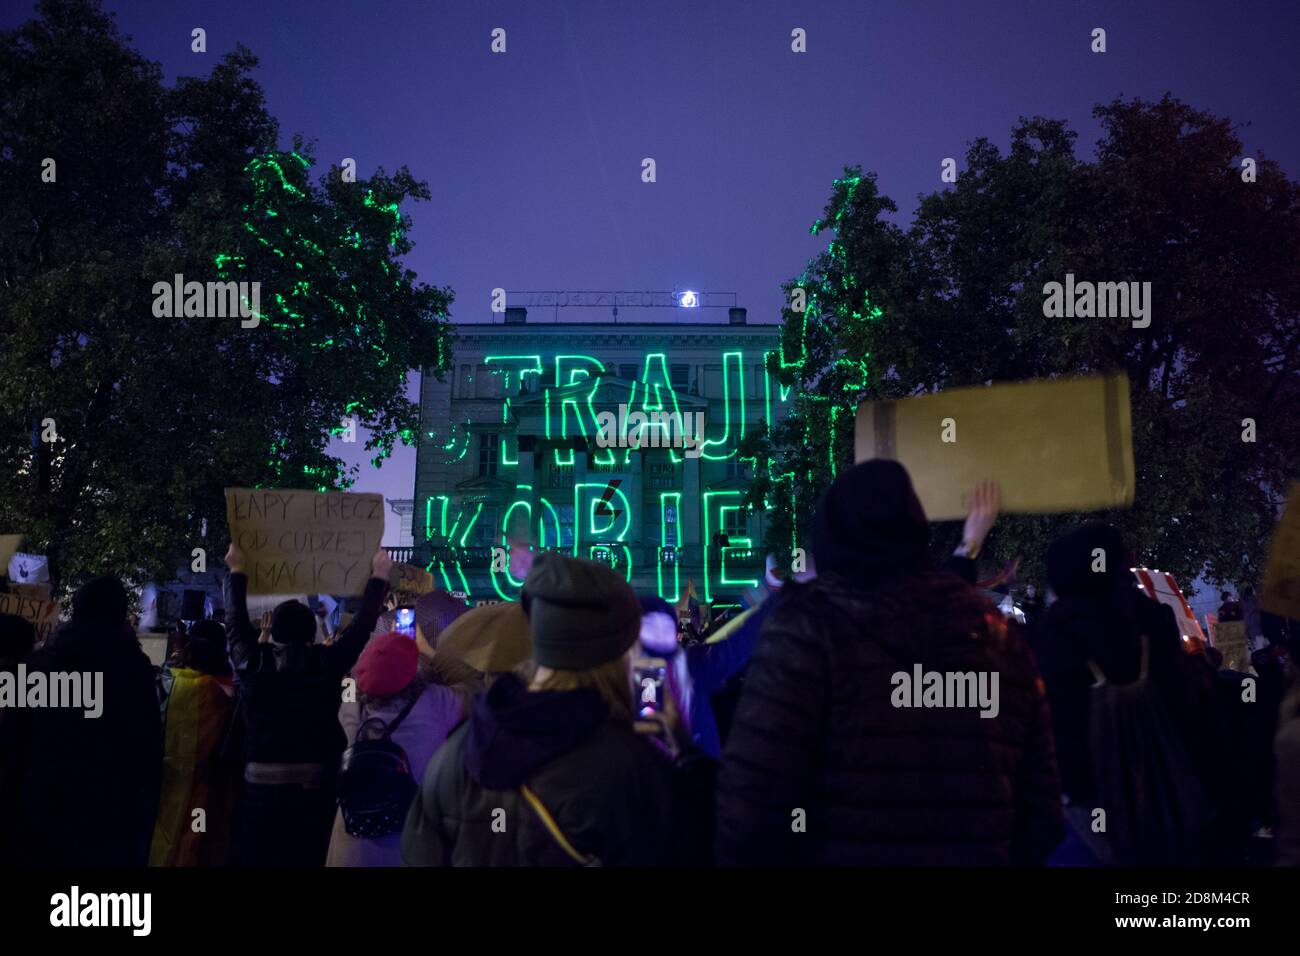 Poznan, POLAND - October 30, 2020: Protest against Poland abortion laws. Women strike and protest over government proposal to tighten abortion law. Stock Photo